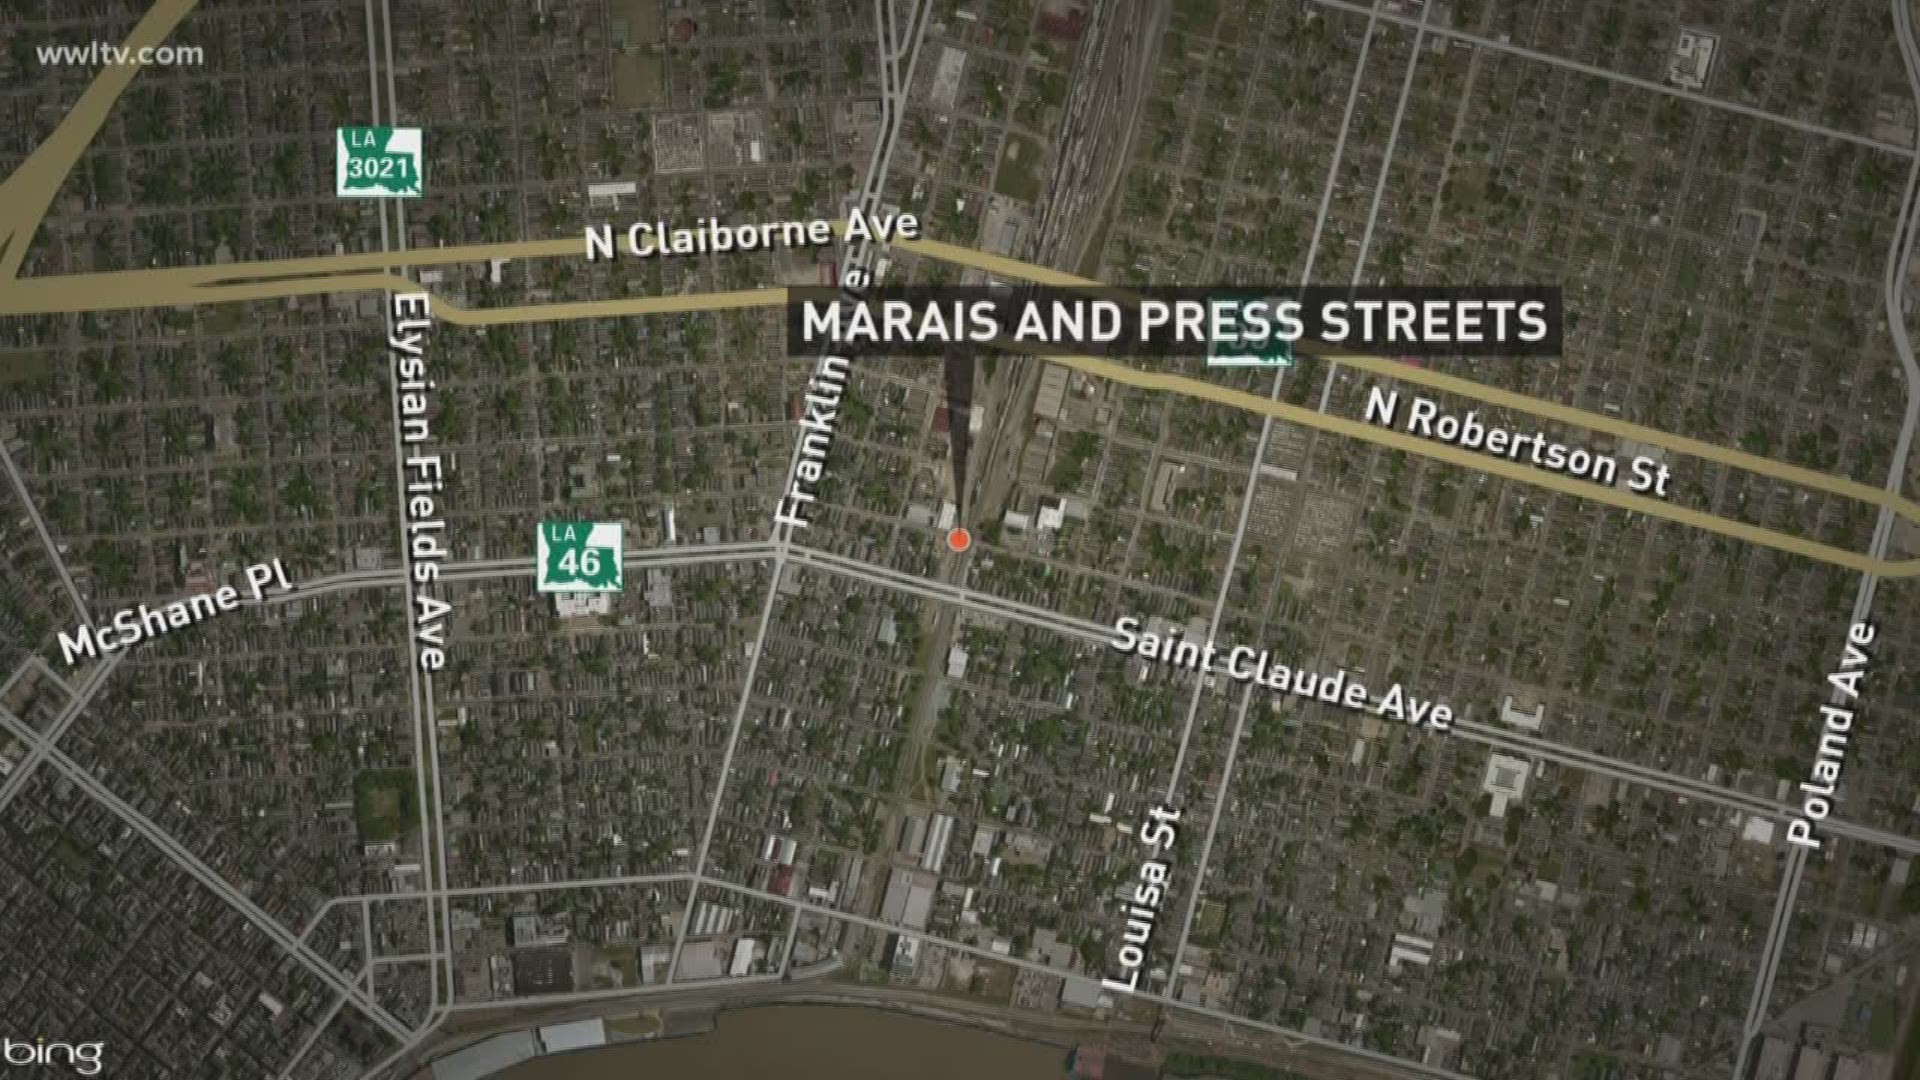 NOPD officials are calling the fatality an unclassified death at this time.